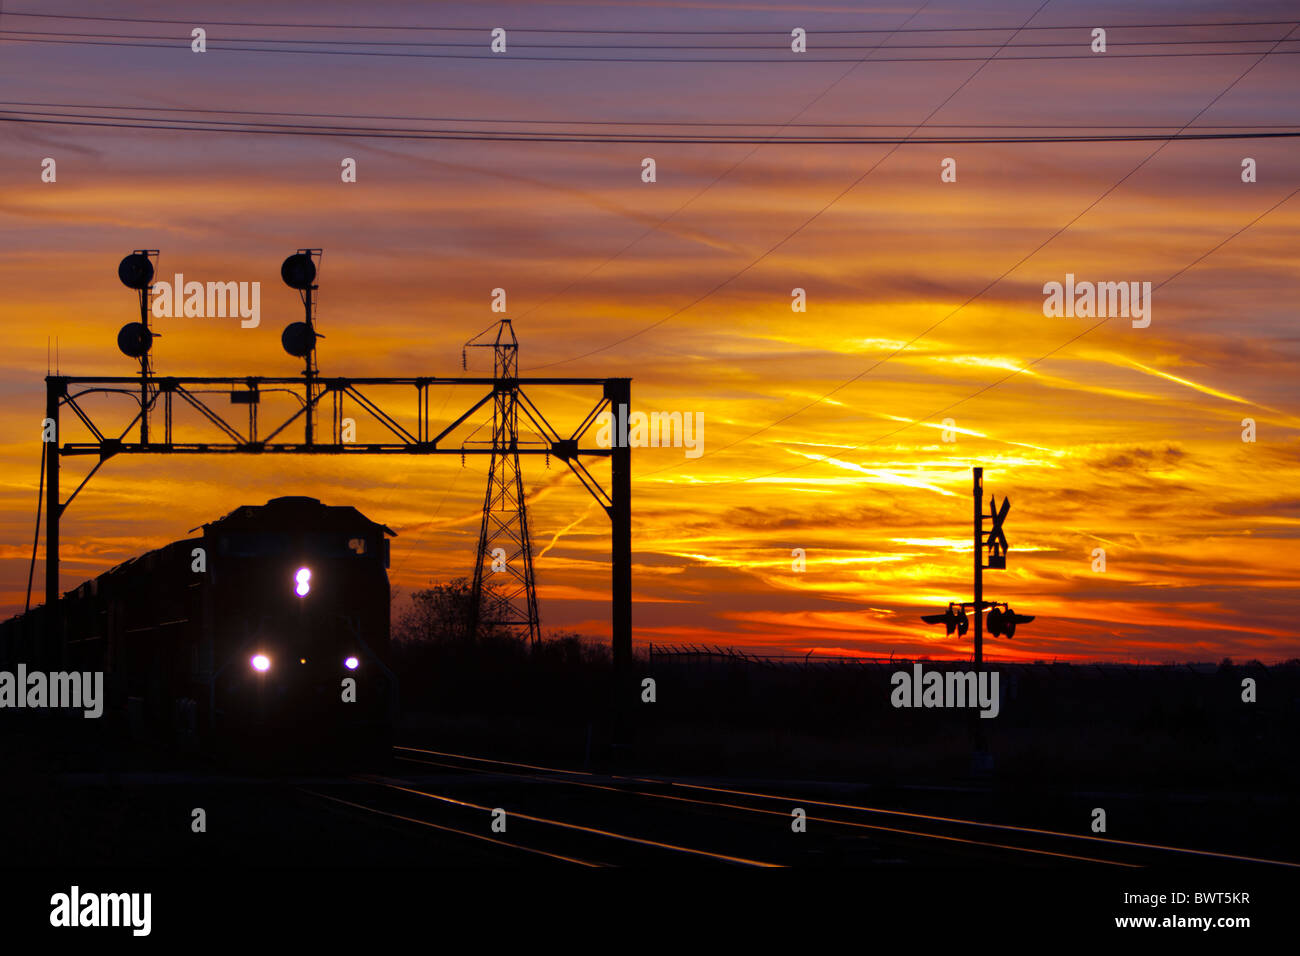 Freight train rolls out of a colorful sunset. Stock Photo